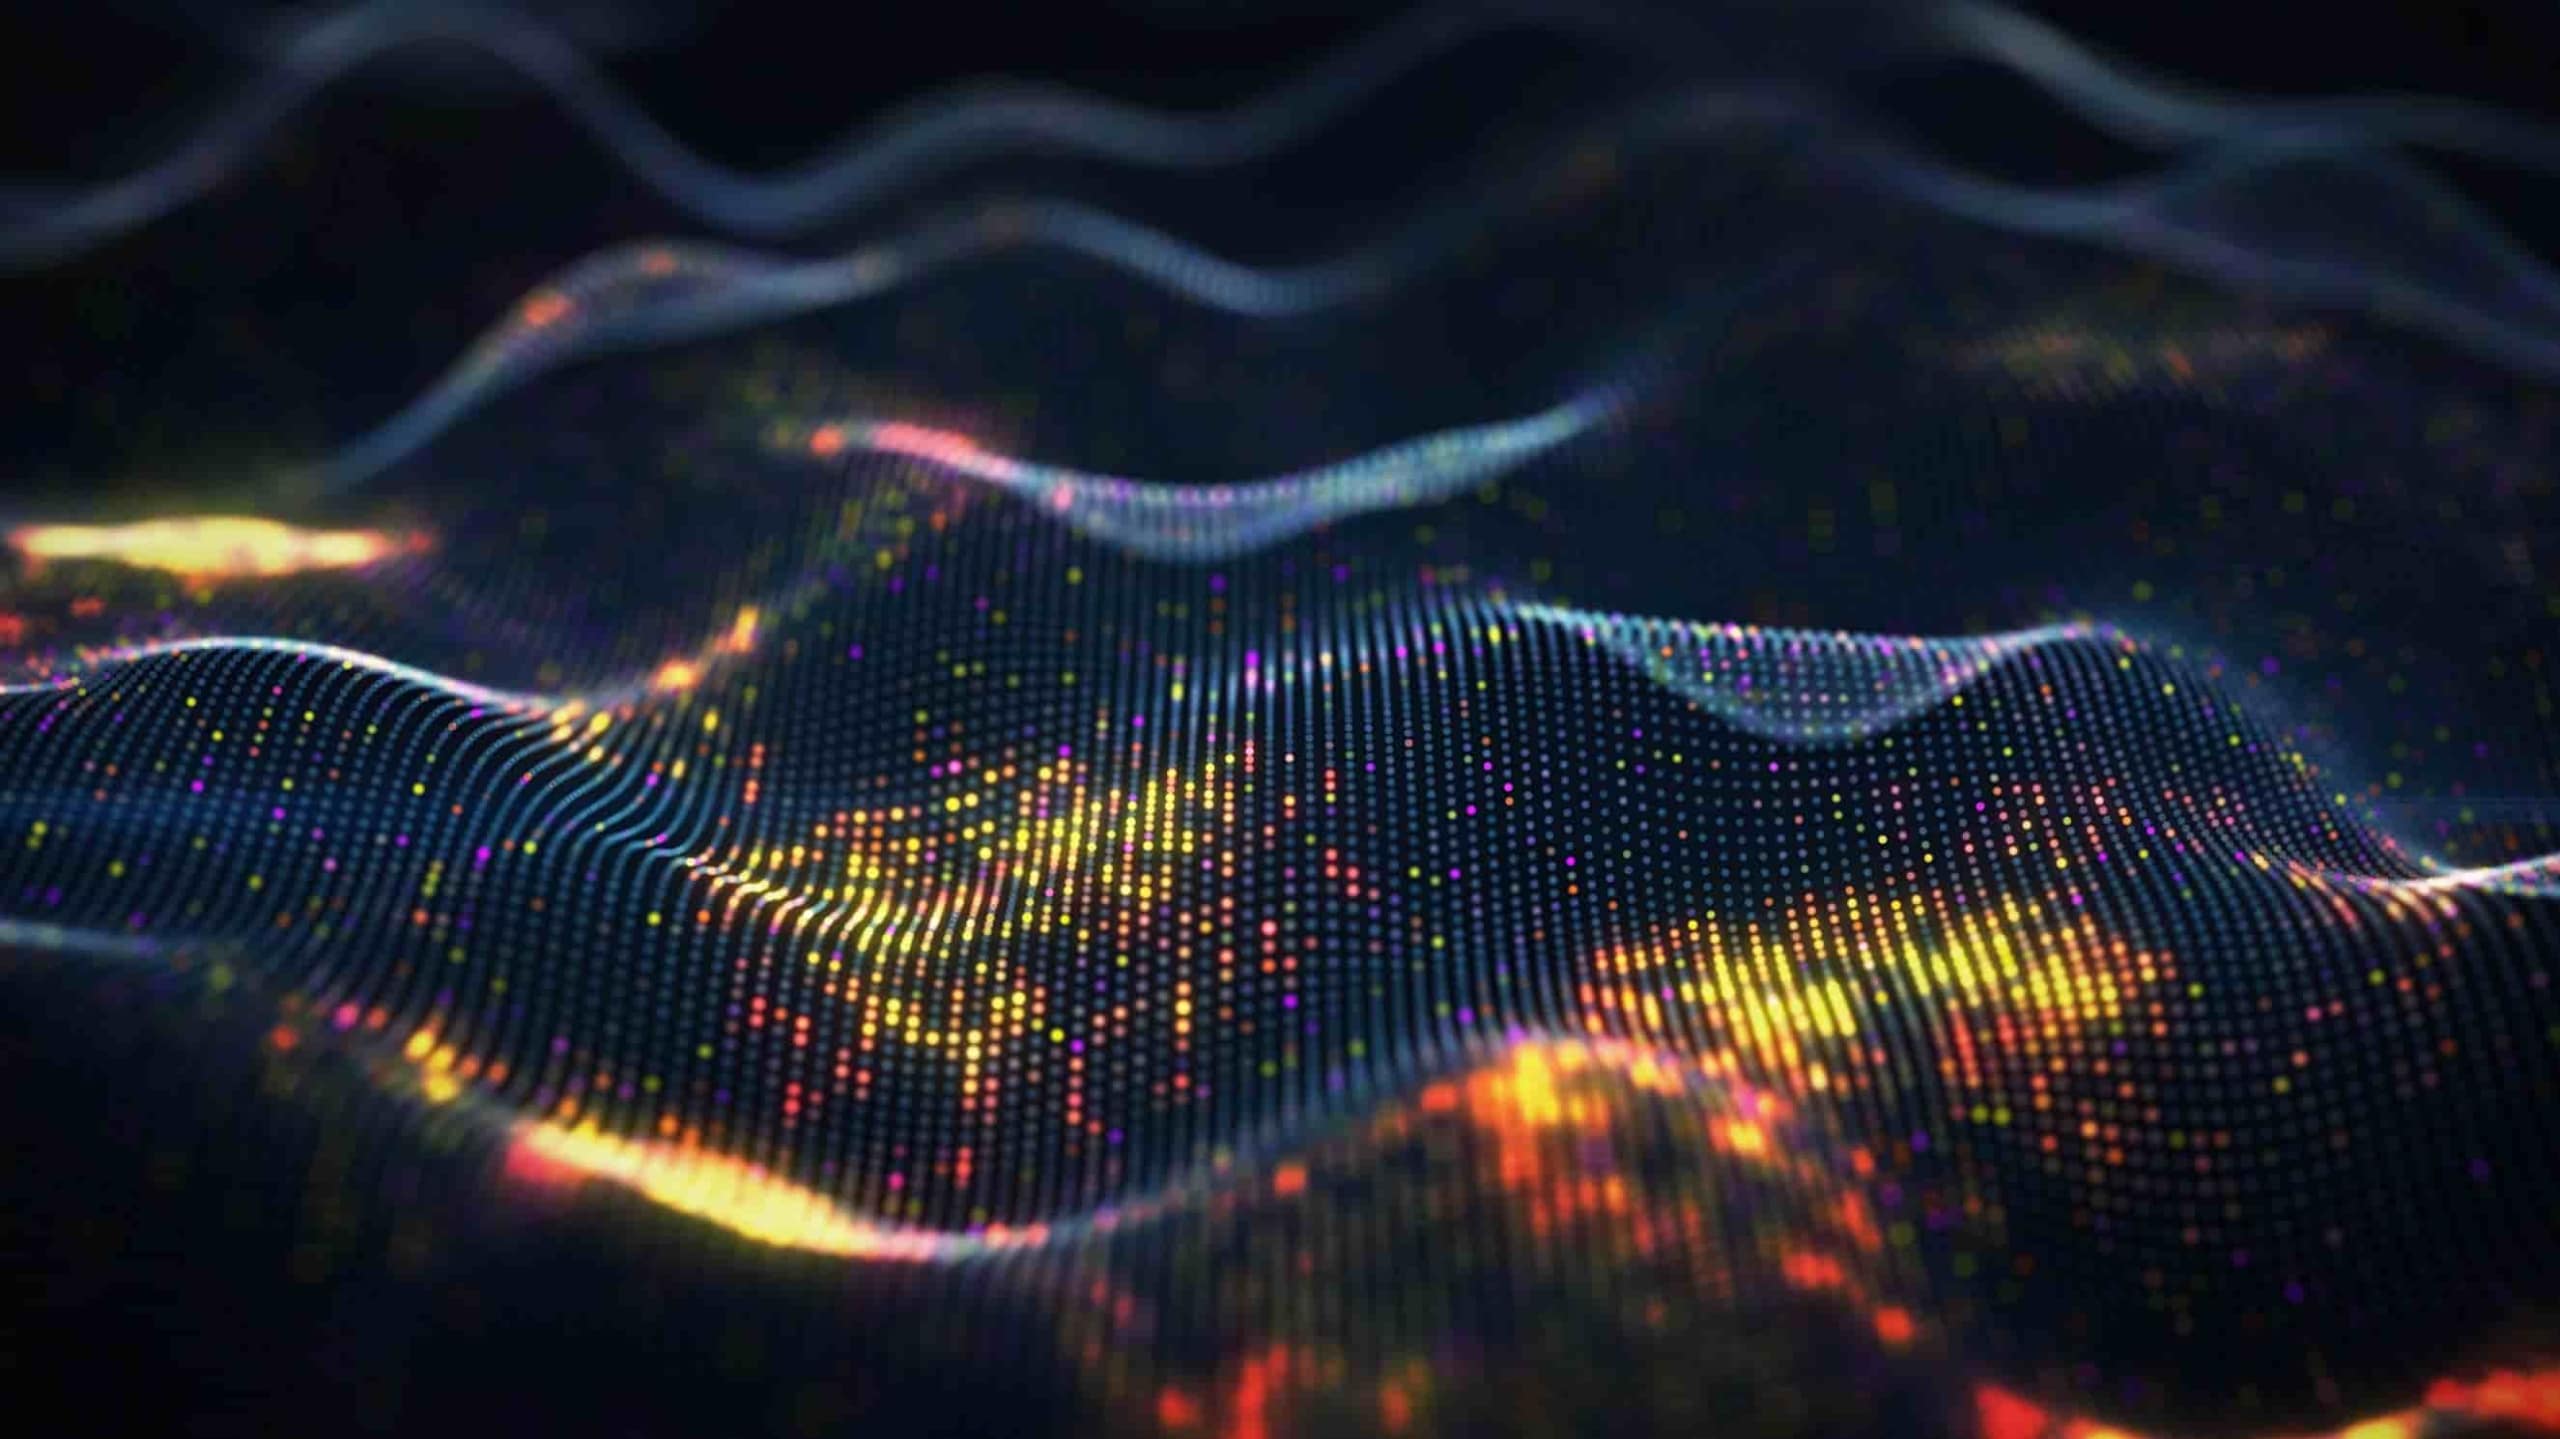 Abstract digital landscape with glowing, multicolored particles forming wave patterns on a dark background, illustrating data or technology concepts.